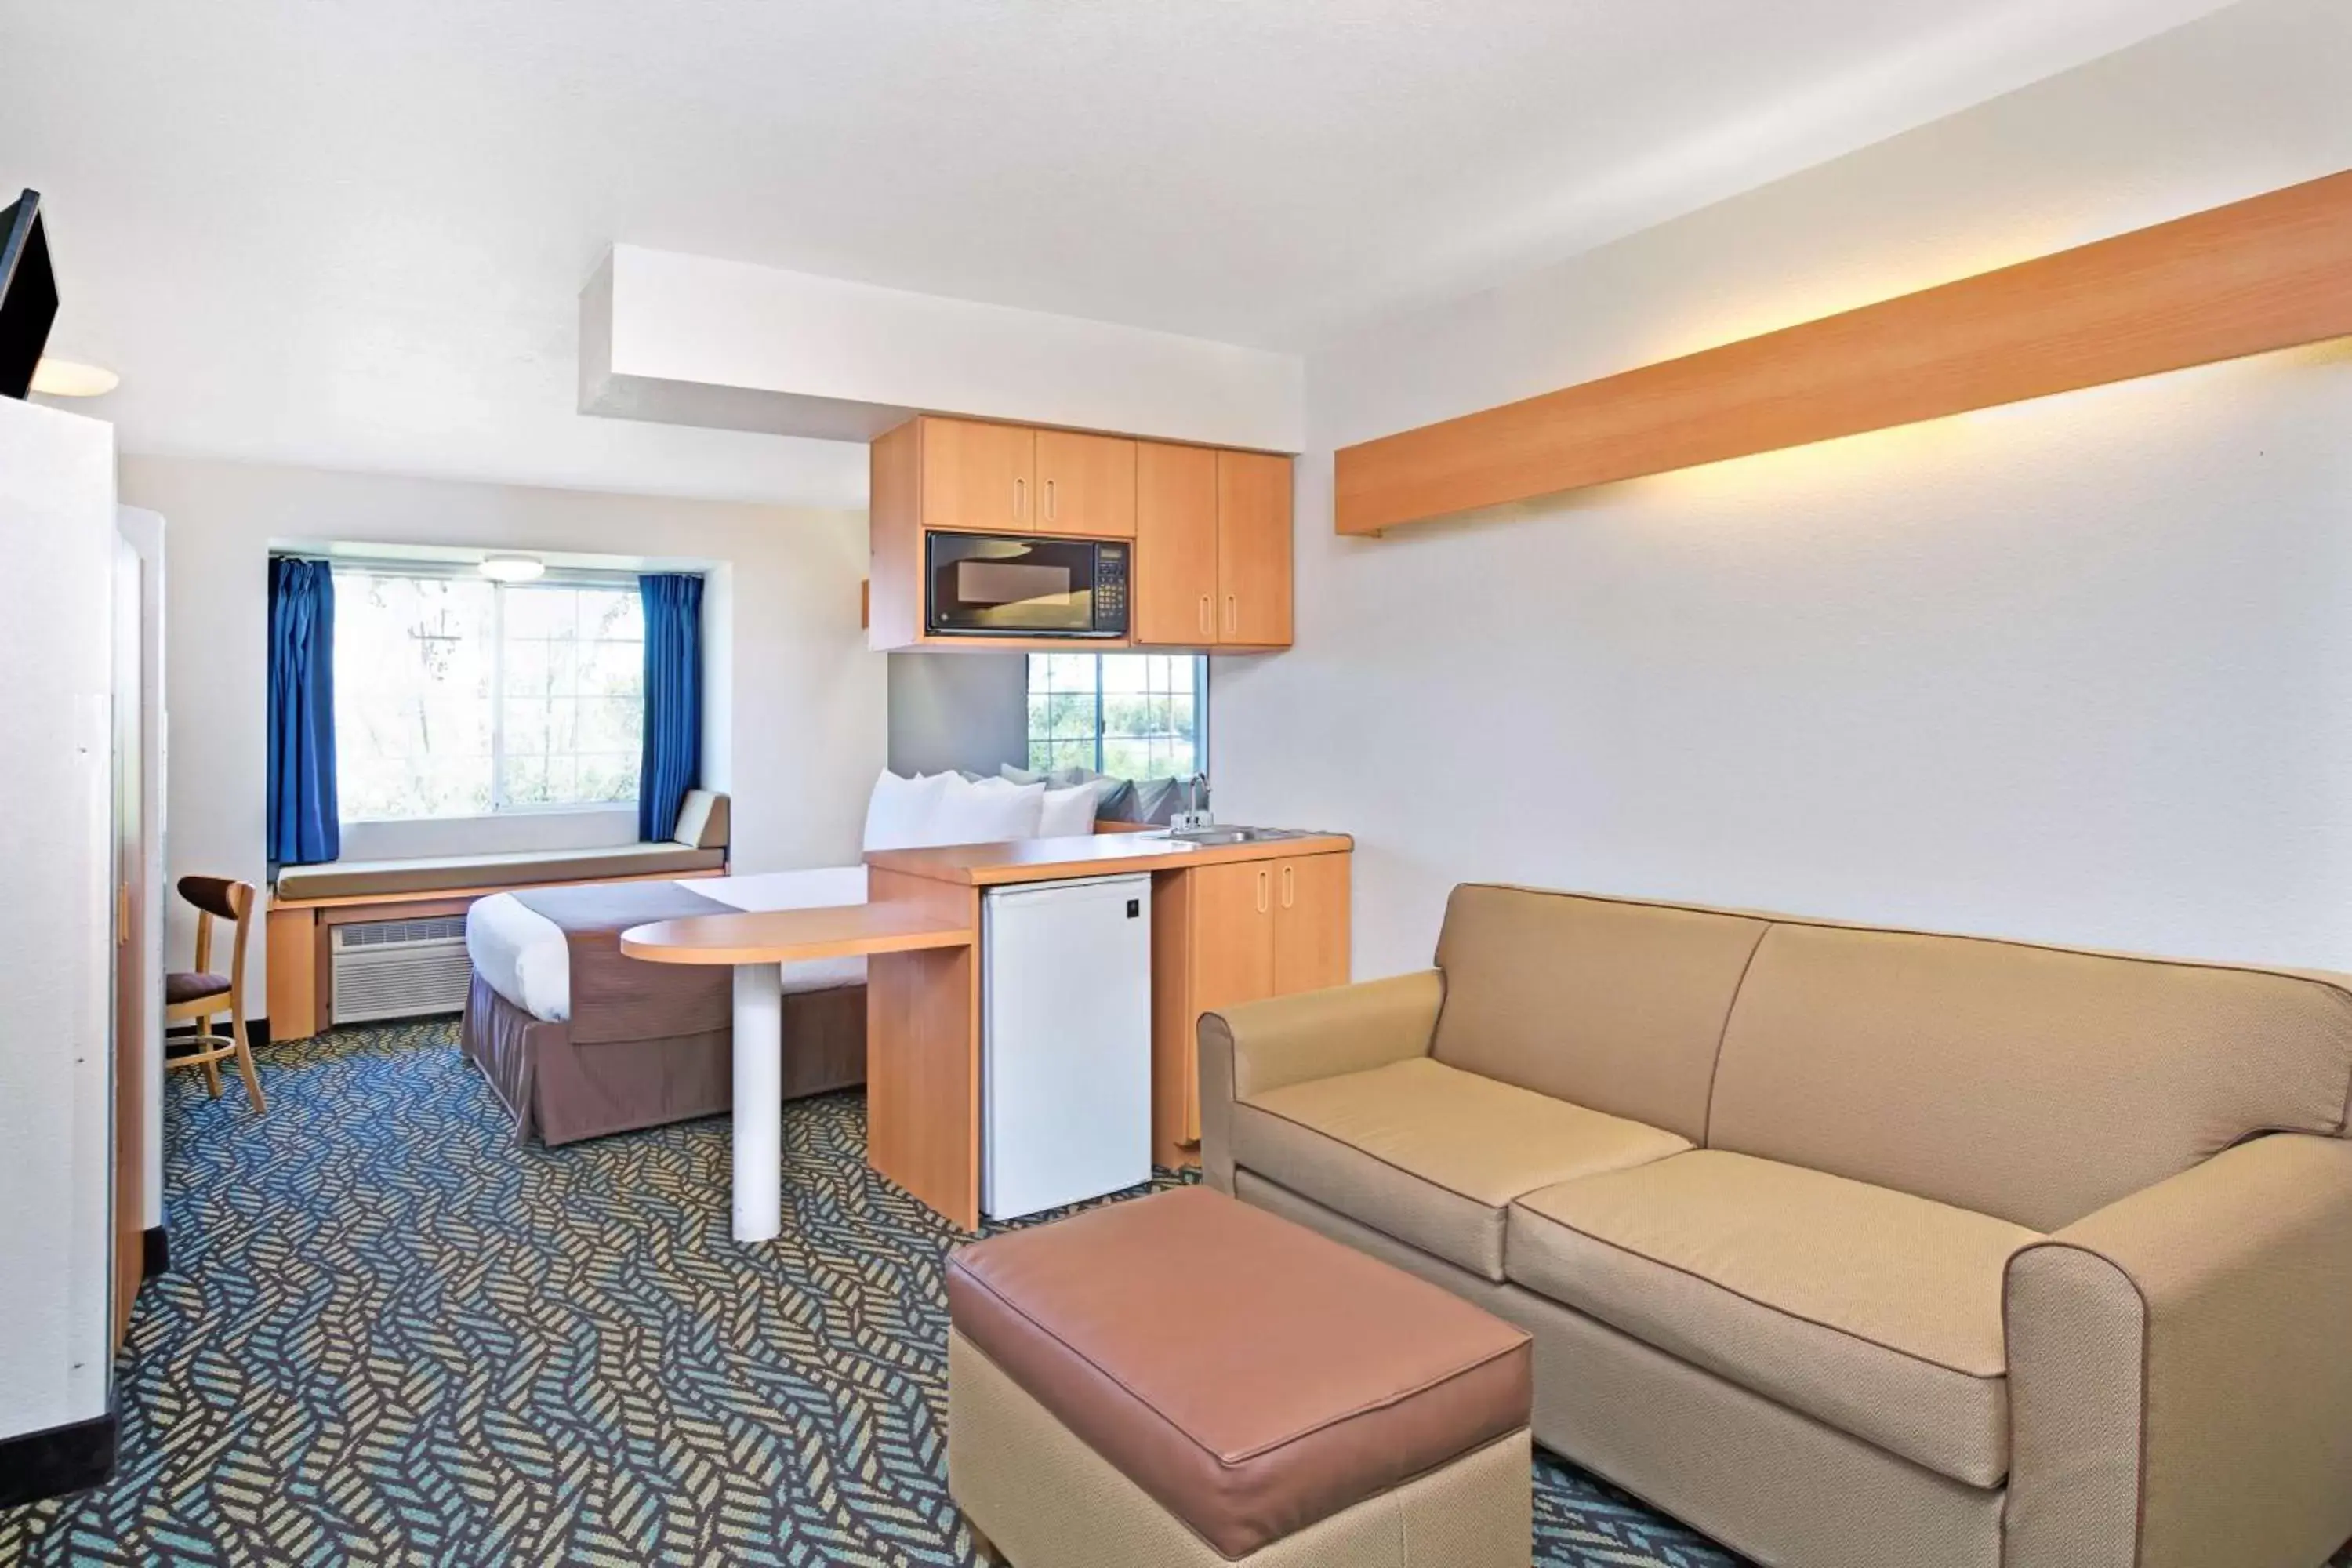 Queen Room with Sofa-bed - Disability Access/Non-Smoking in Microtel Inn & Suites, Morgan Hill